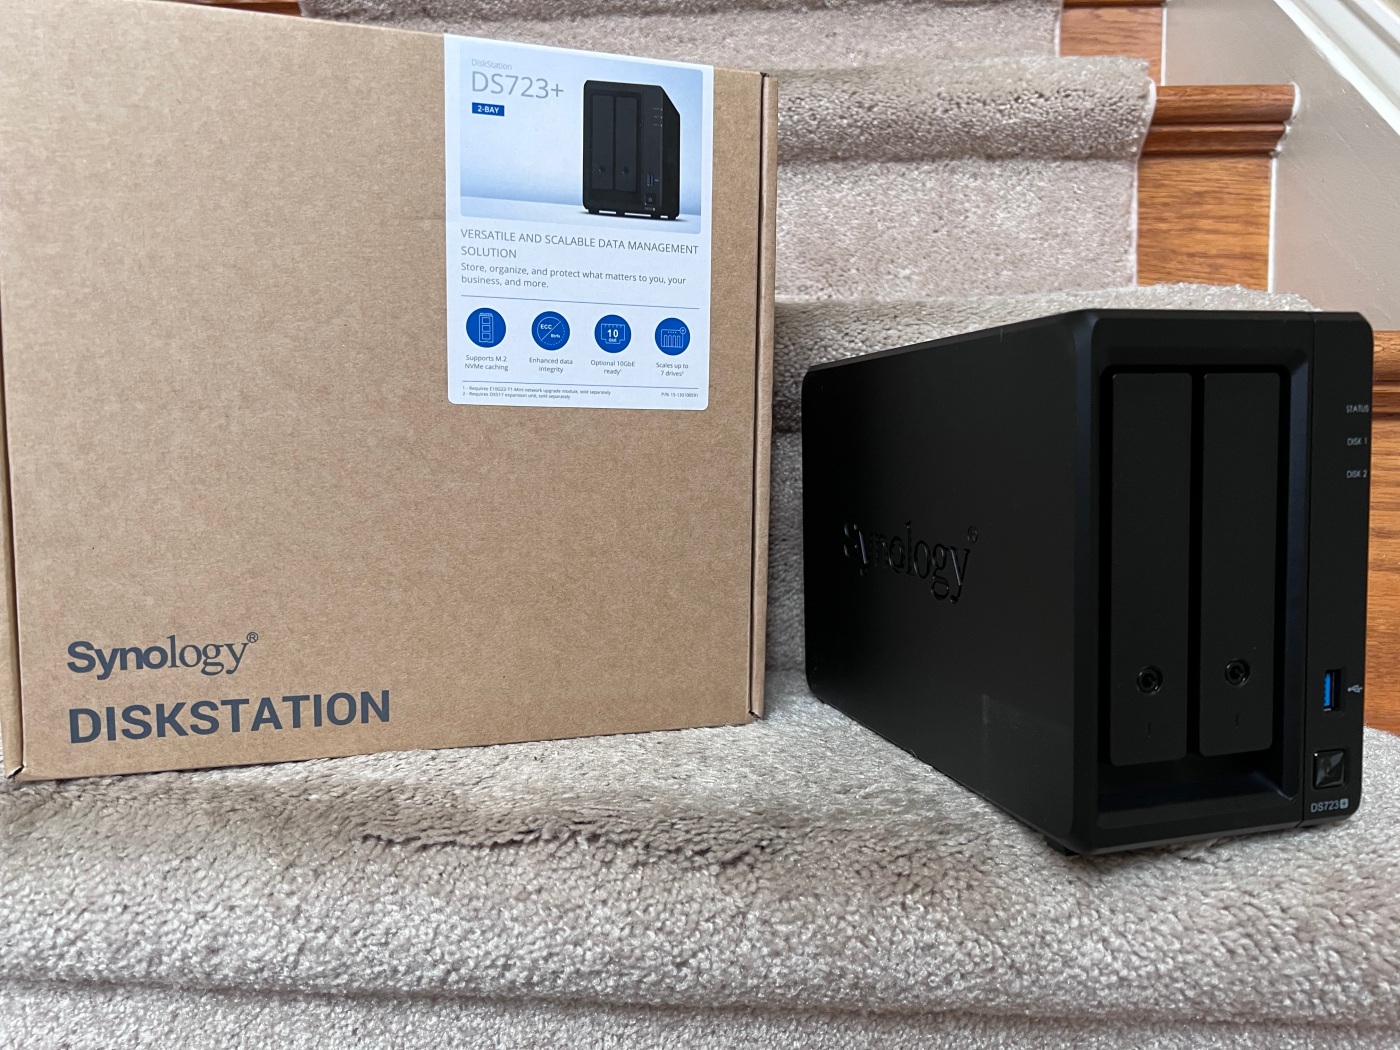 Review - Synology DS723+ NAS